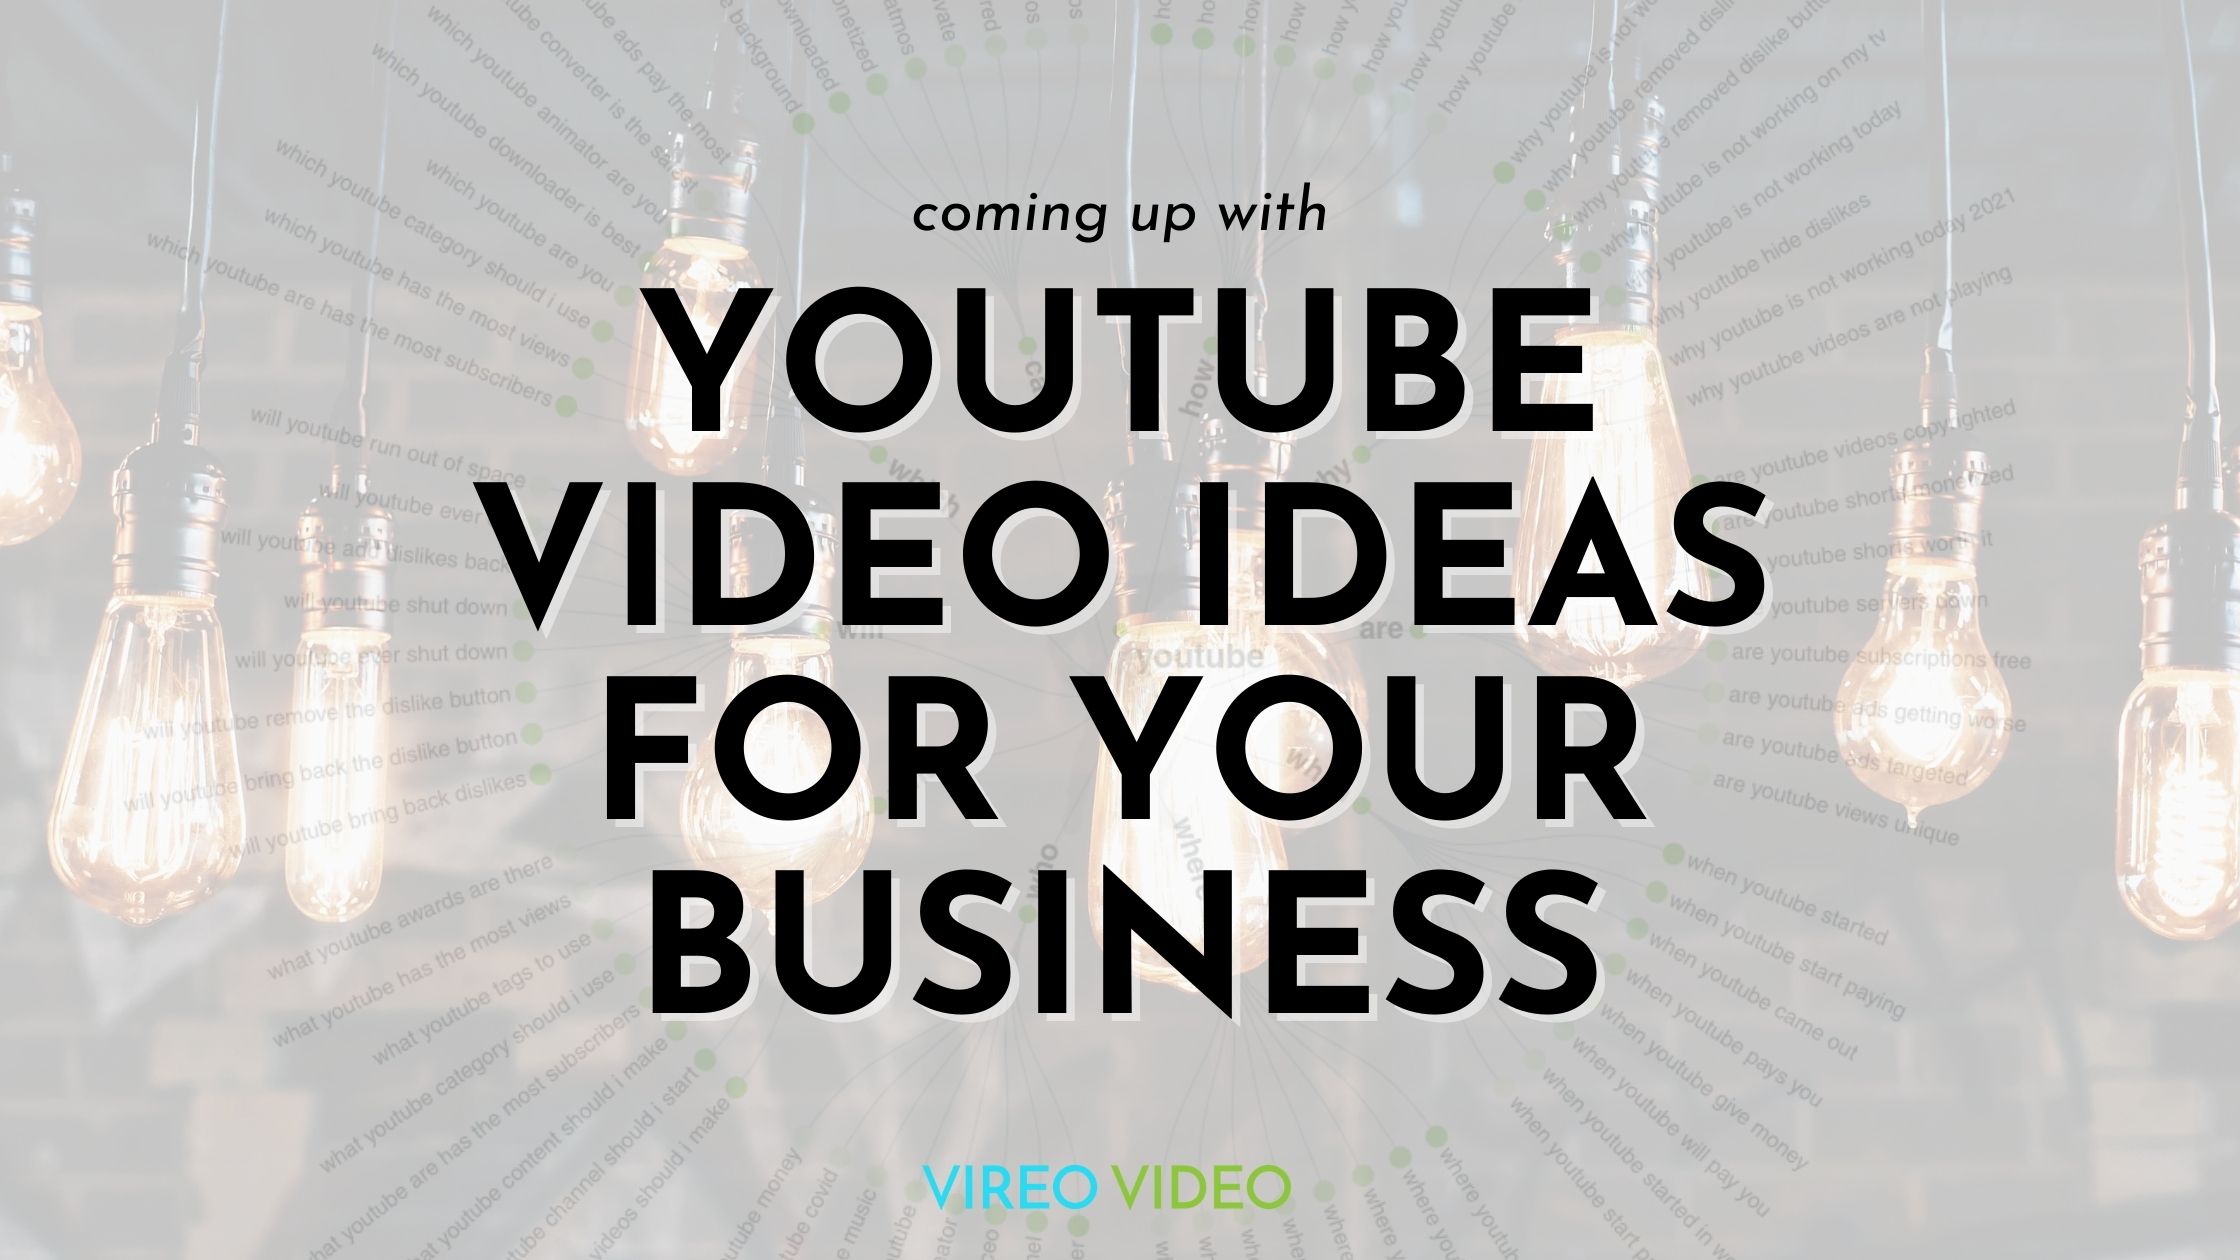 Blog post header image for YouTube Video Ideas for your business